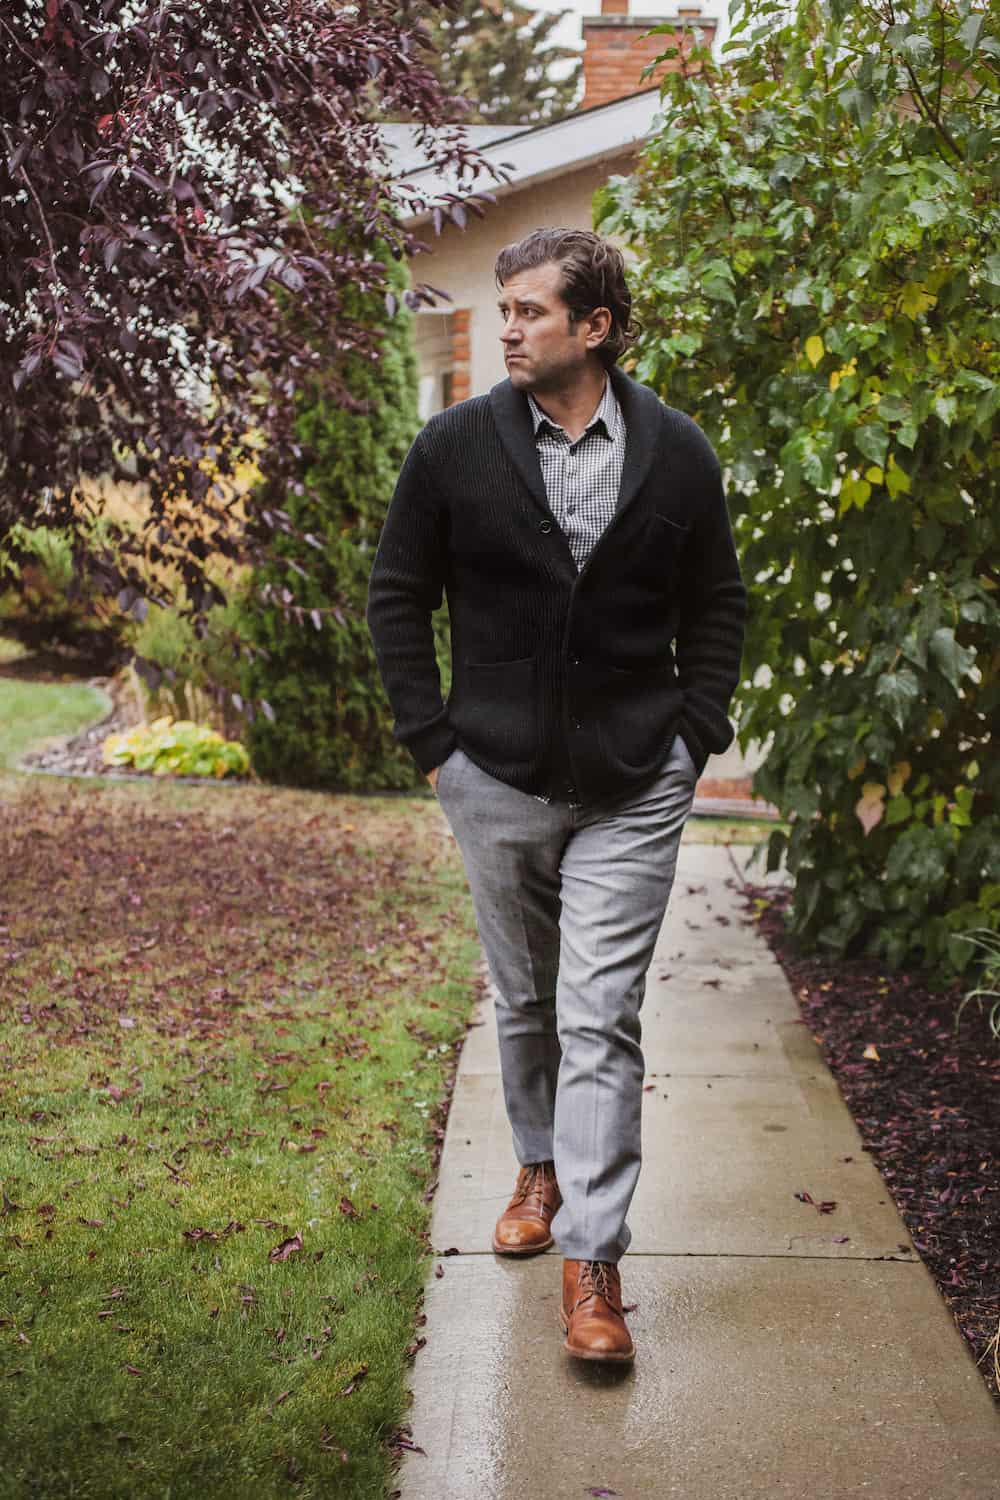 image of a man walking, wearing light grey pants, boots, and a black sweater